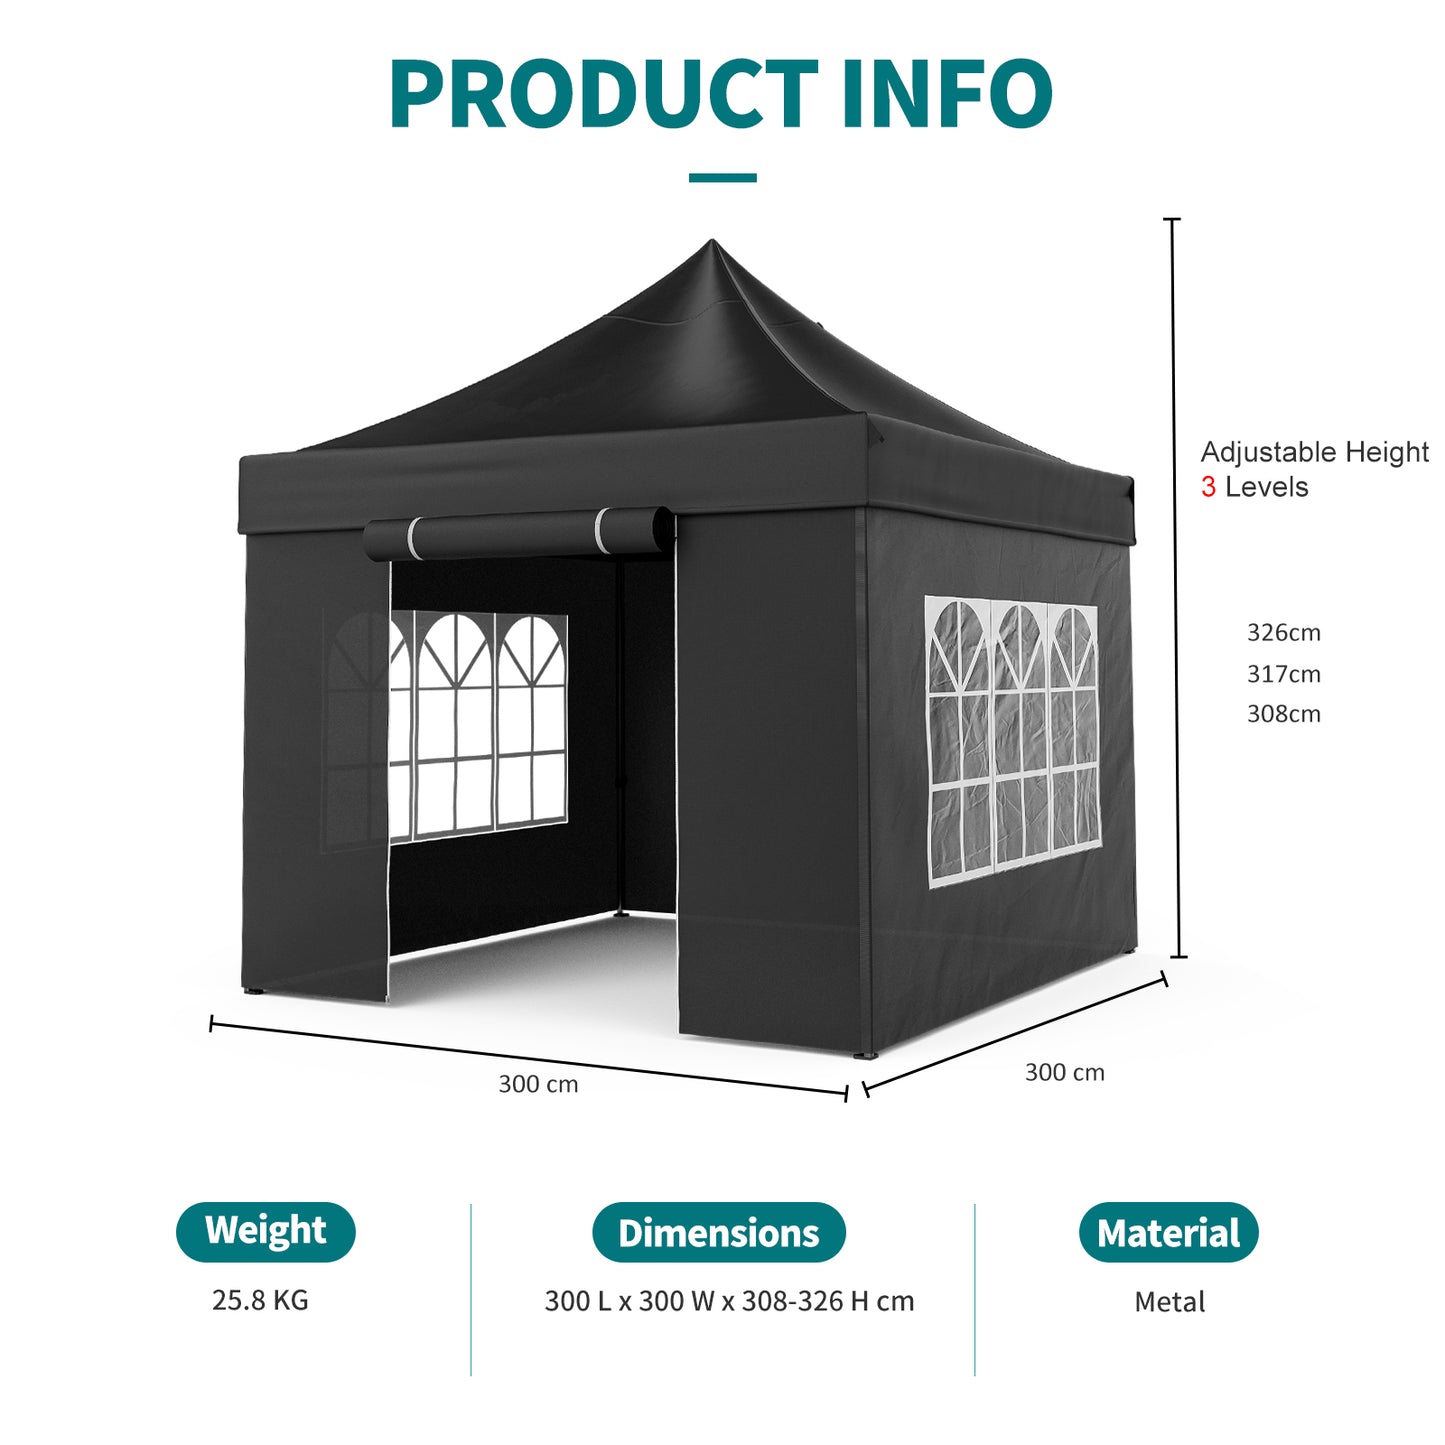 10 x10 Black Pop Up Canopy Tent with Sidewalls for Outdoor Camping